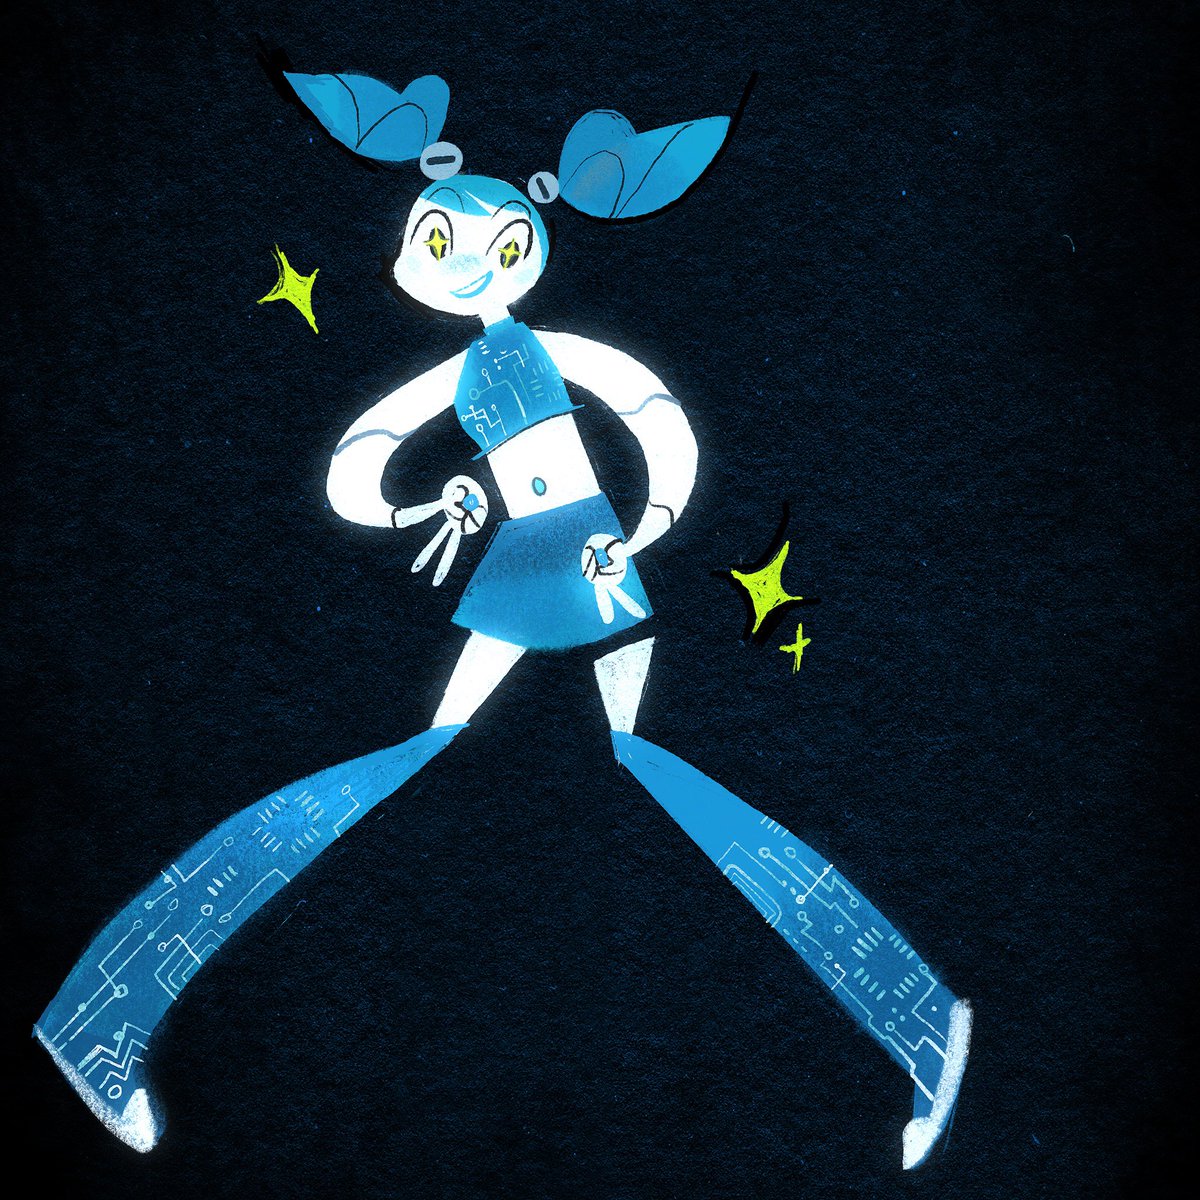 RT @queenofgoldfish: Was watching videos about my life as a teenage robot so shdkdjddk Jenny doodle https://t.co/hrxOWRc7oB